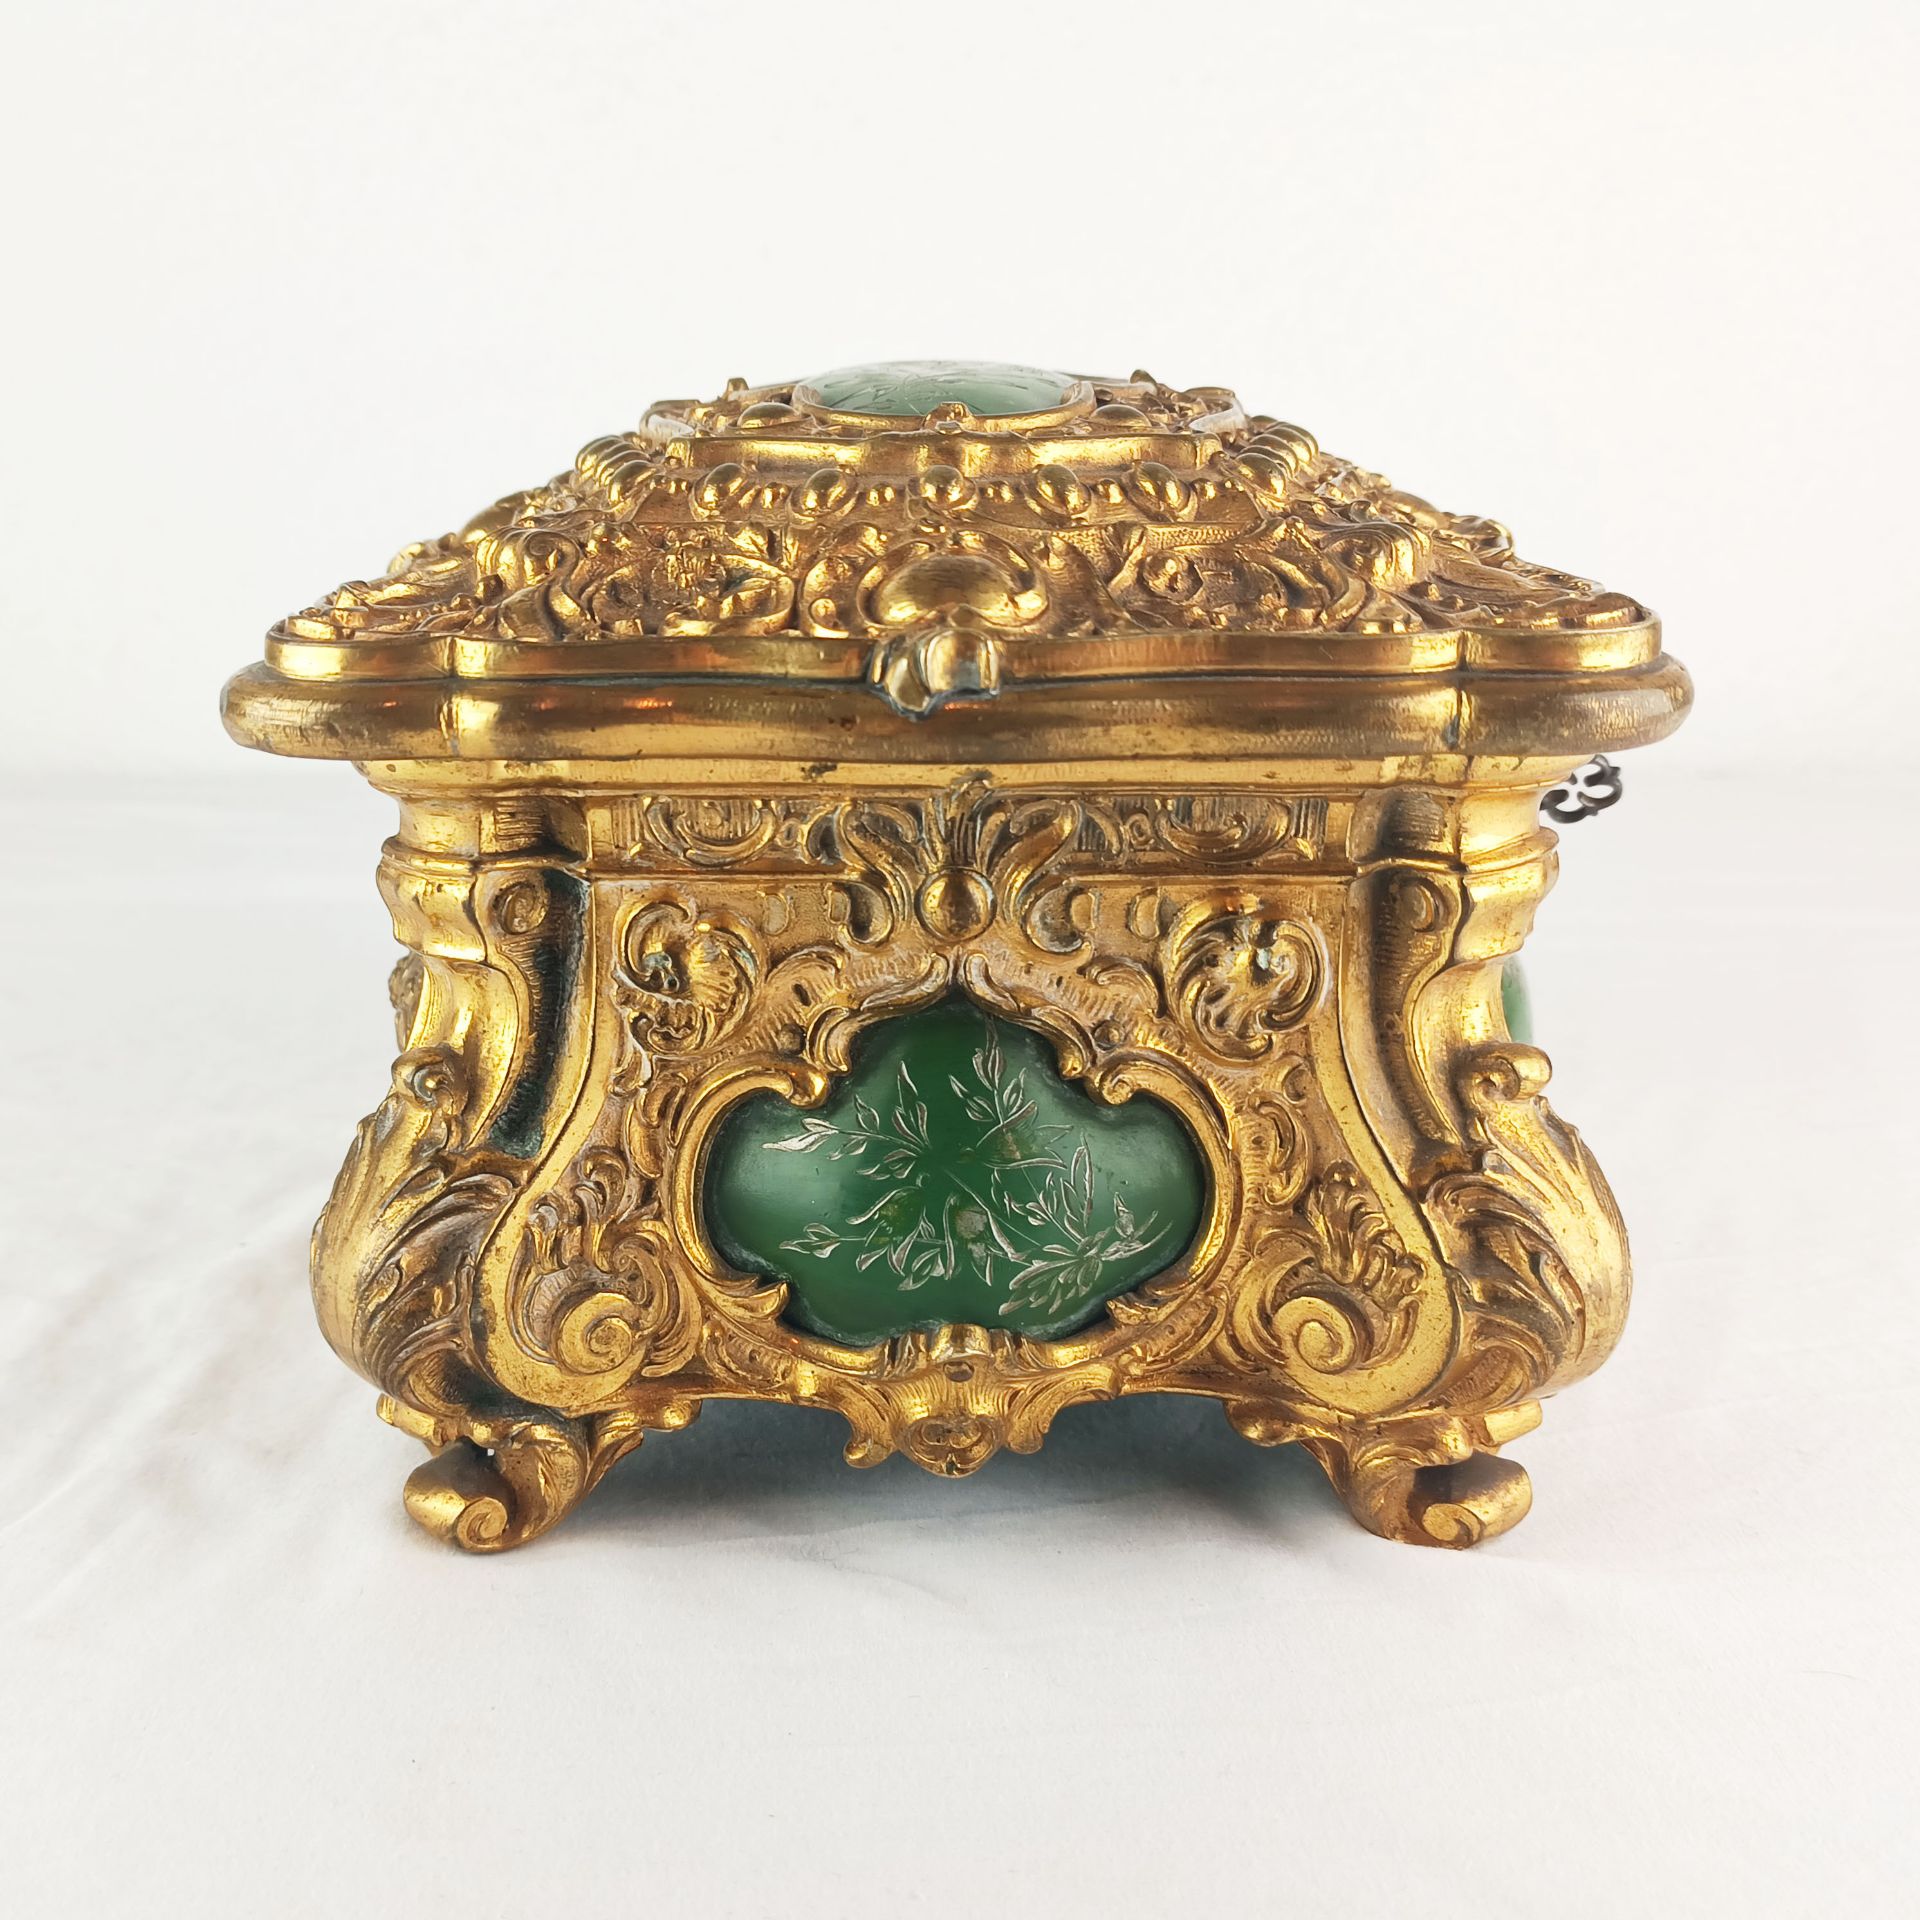 Unusual Brass and Horn Jewelry Music Box - Image 8 of 9